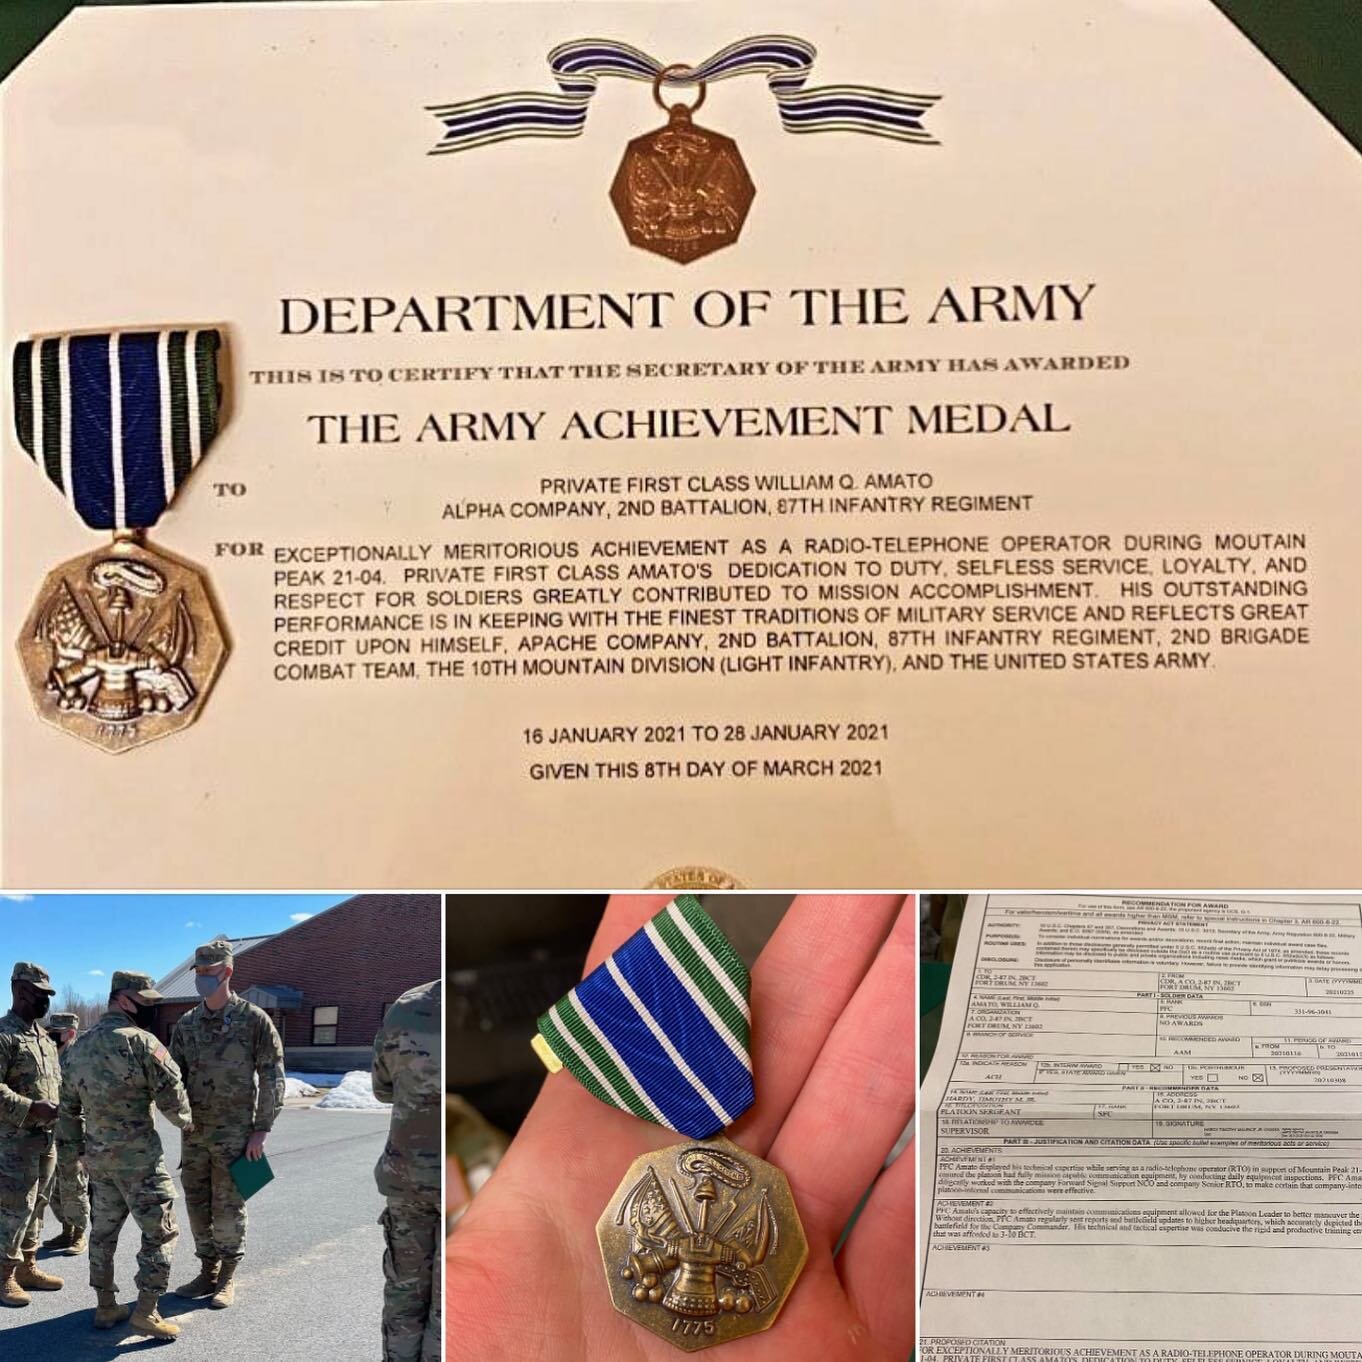 This happened today.  PFC AMATO awarded an Army Achievement Medal (AAM). For his technical expertise while serving as radio telephone operator. (RTO) supporting Mountain Peak. 

Apache Company 2nd Battalion, 87th Infantry Regiment, 2nd Brigade... 10t